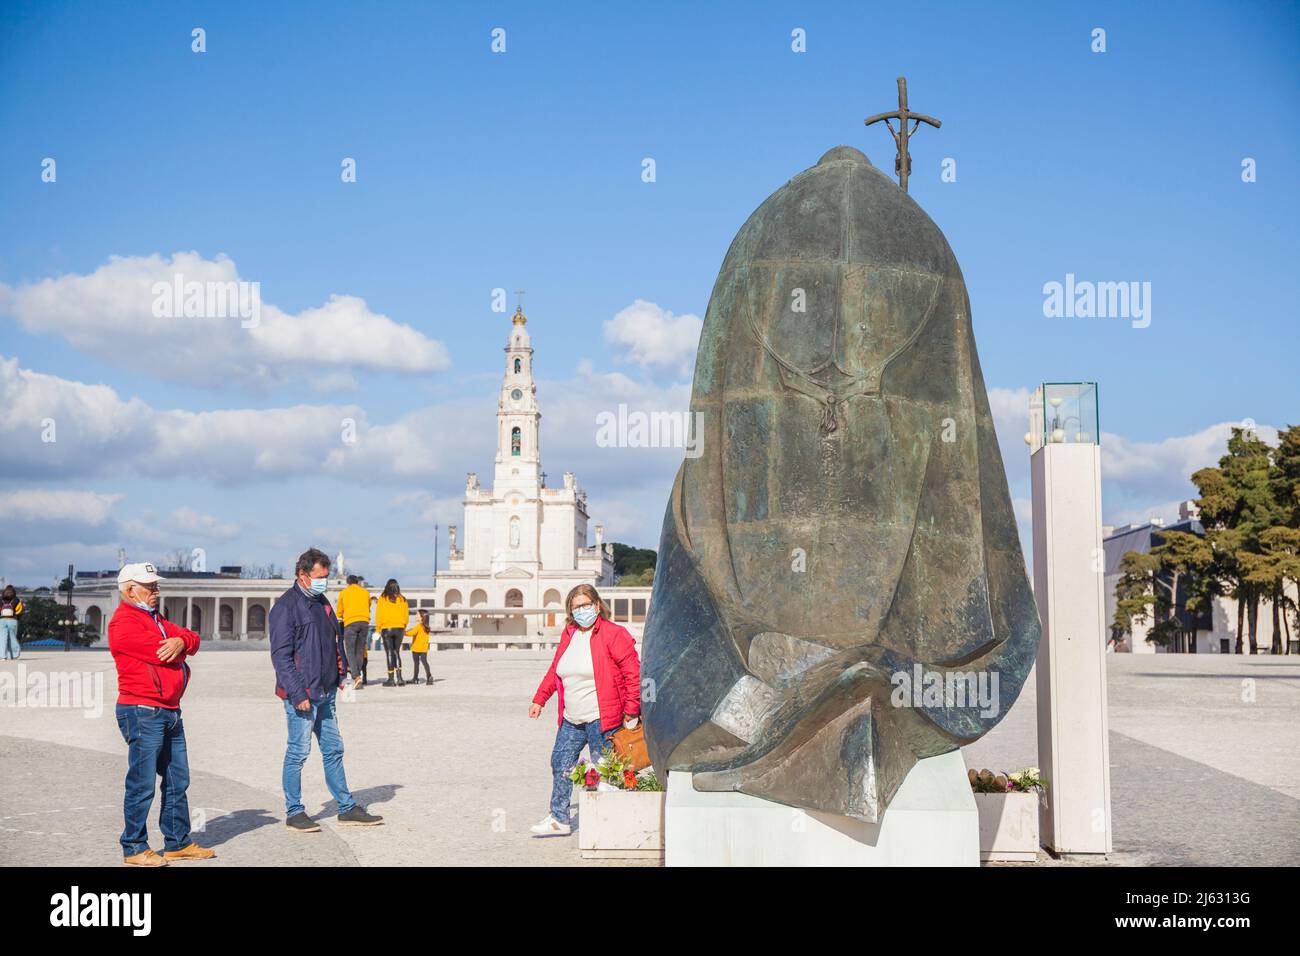 kneeling Statue from Pope Johannes Paul II facing the Basilica of Our Lady of the Rosary in Fatima Portugal Stock Photo